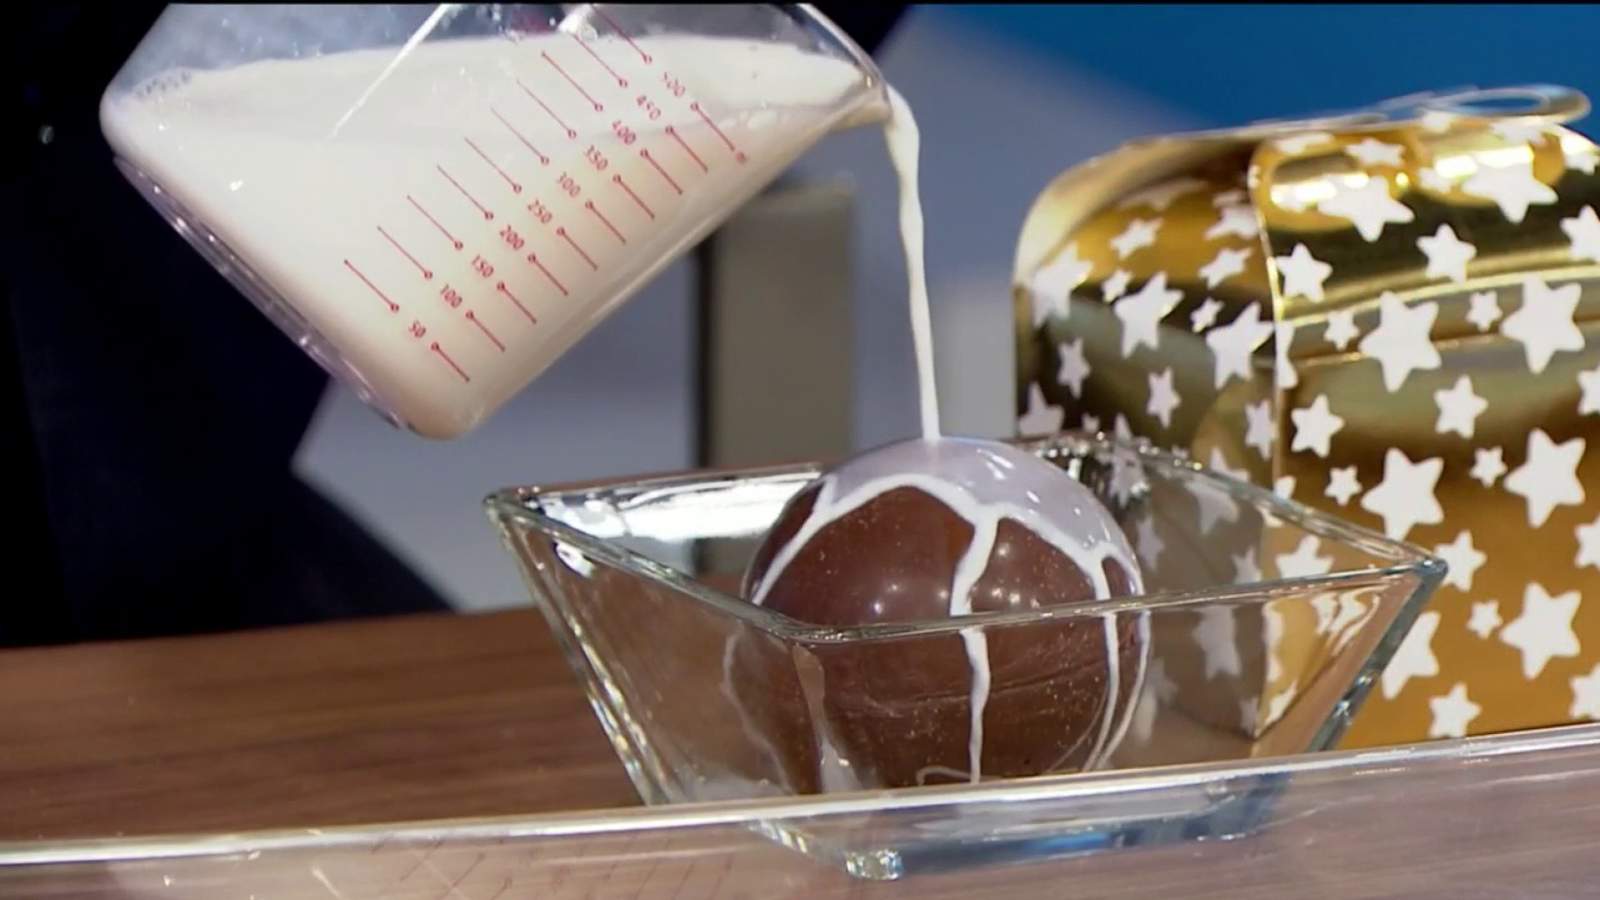 These hot chocolate bombs have a sweet surprise